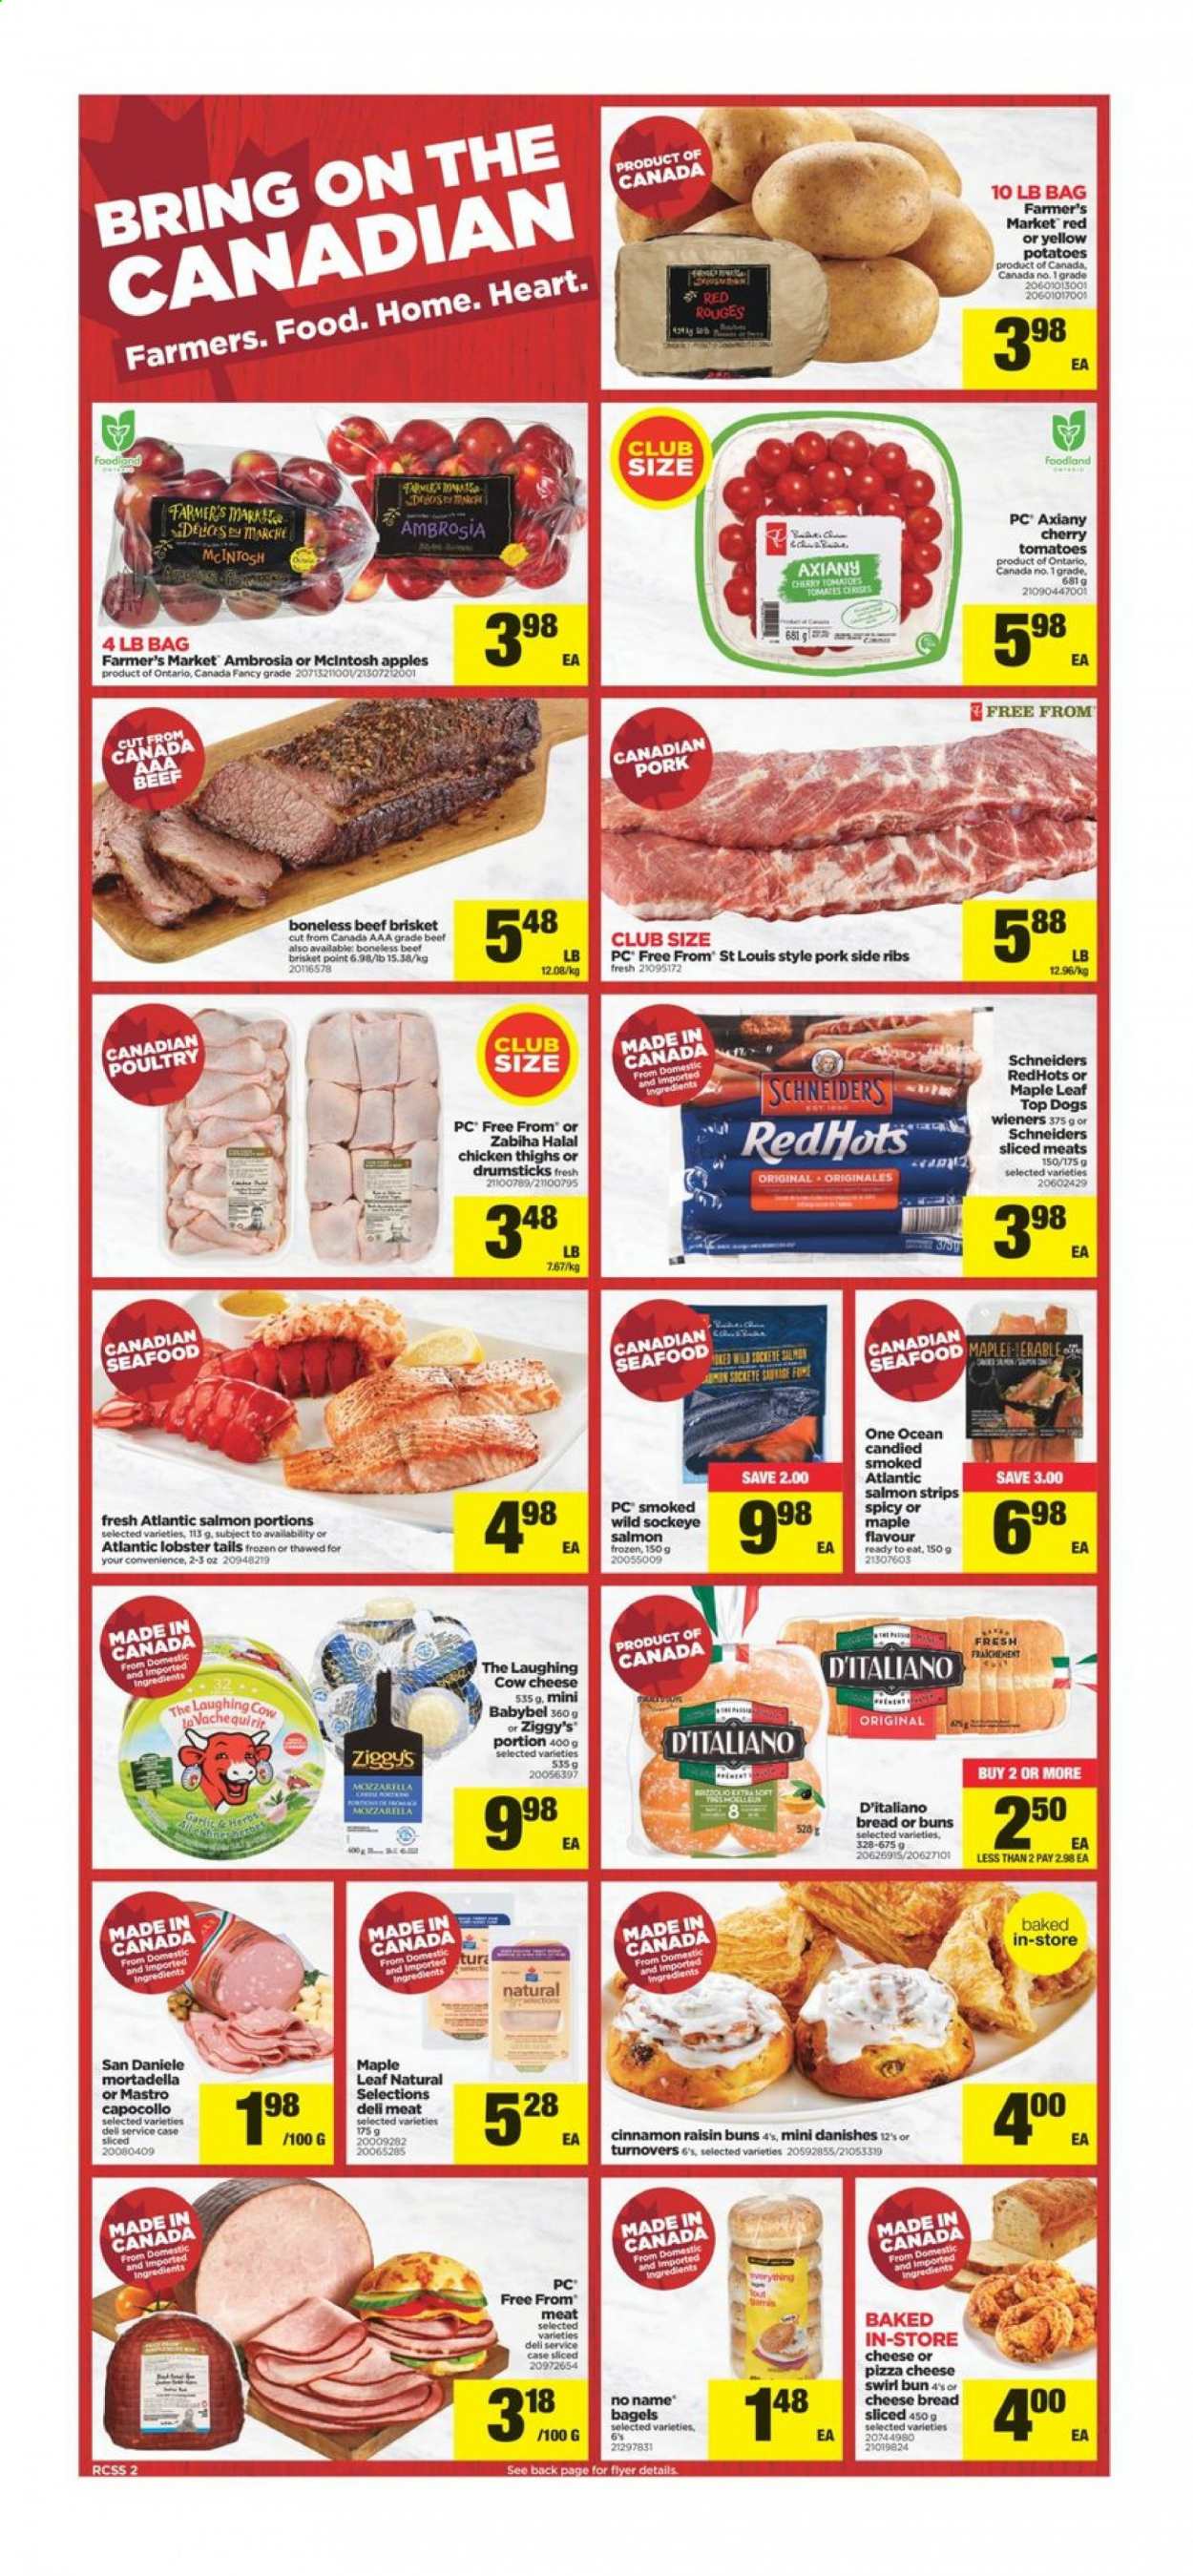 thumbnail - Real Canadian Superstore Flyer - March 11, 2021 - March 17, 2021 - Sales products - bagels, buns, turnovers, potatoes, cherries, lobster, salmon, seafood, lobster tail, No Name, pizza, mortadella, The Laughing Cow, Babybel, chicken thighs, chicken, beef meat, beef brisket, McIntosh. Page 2.